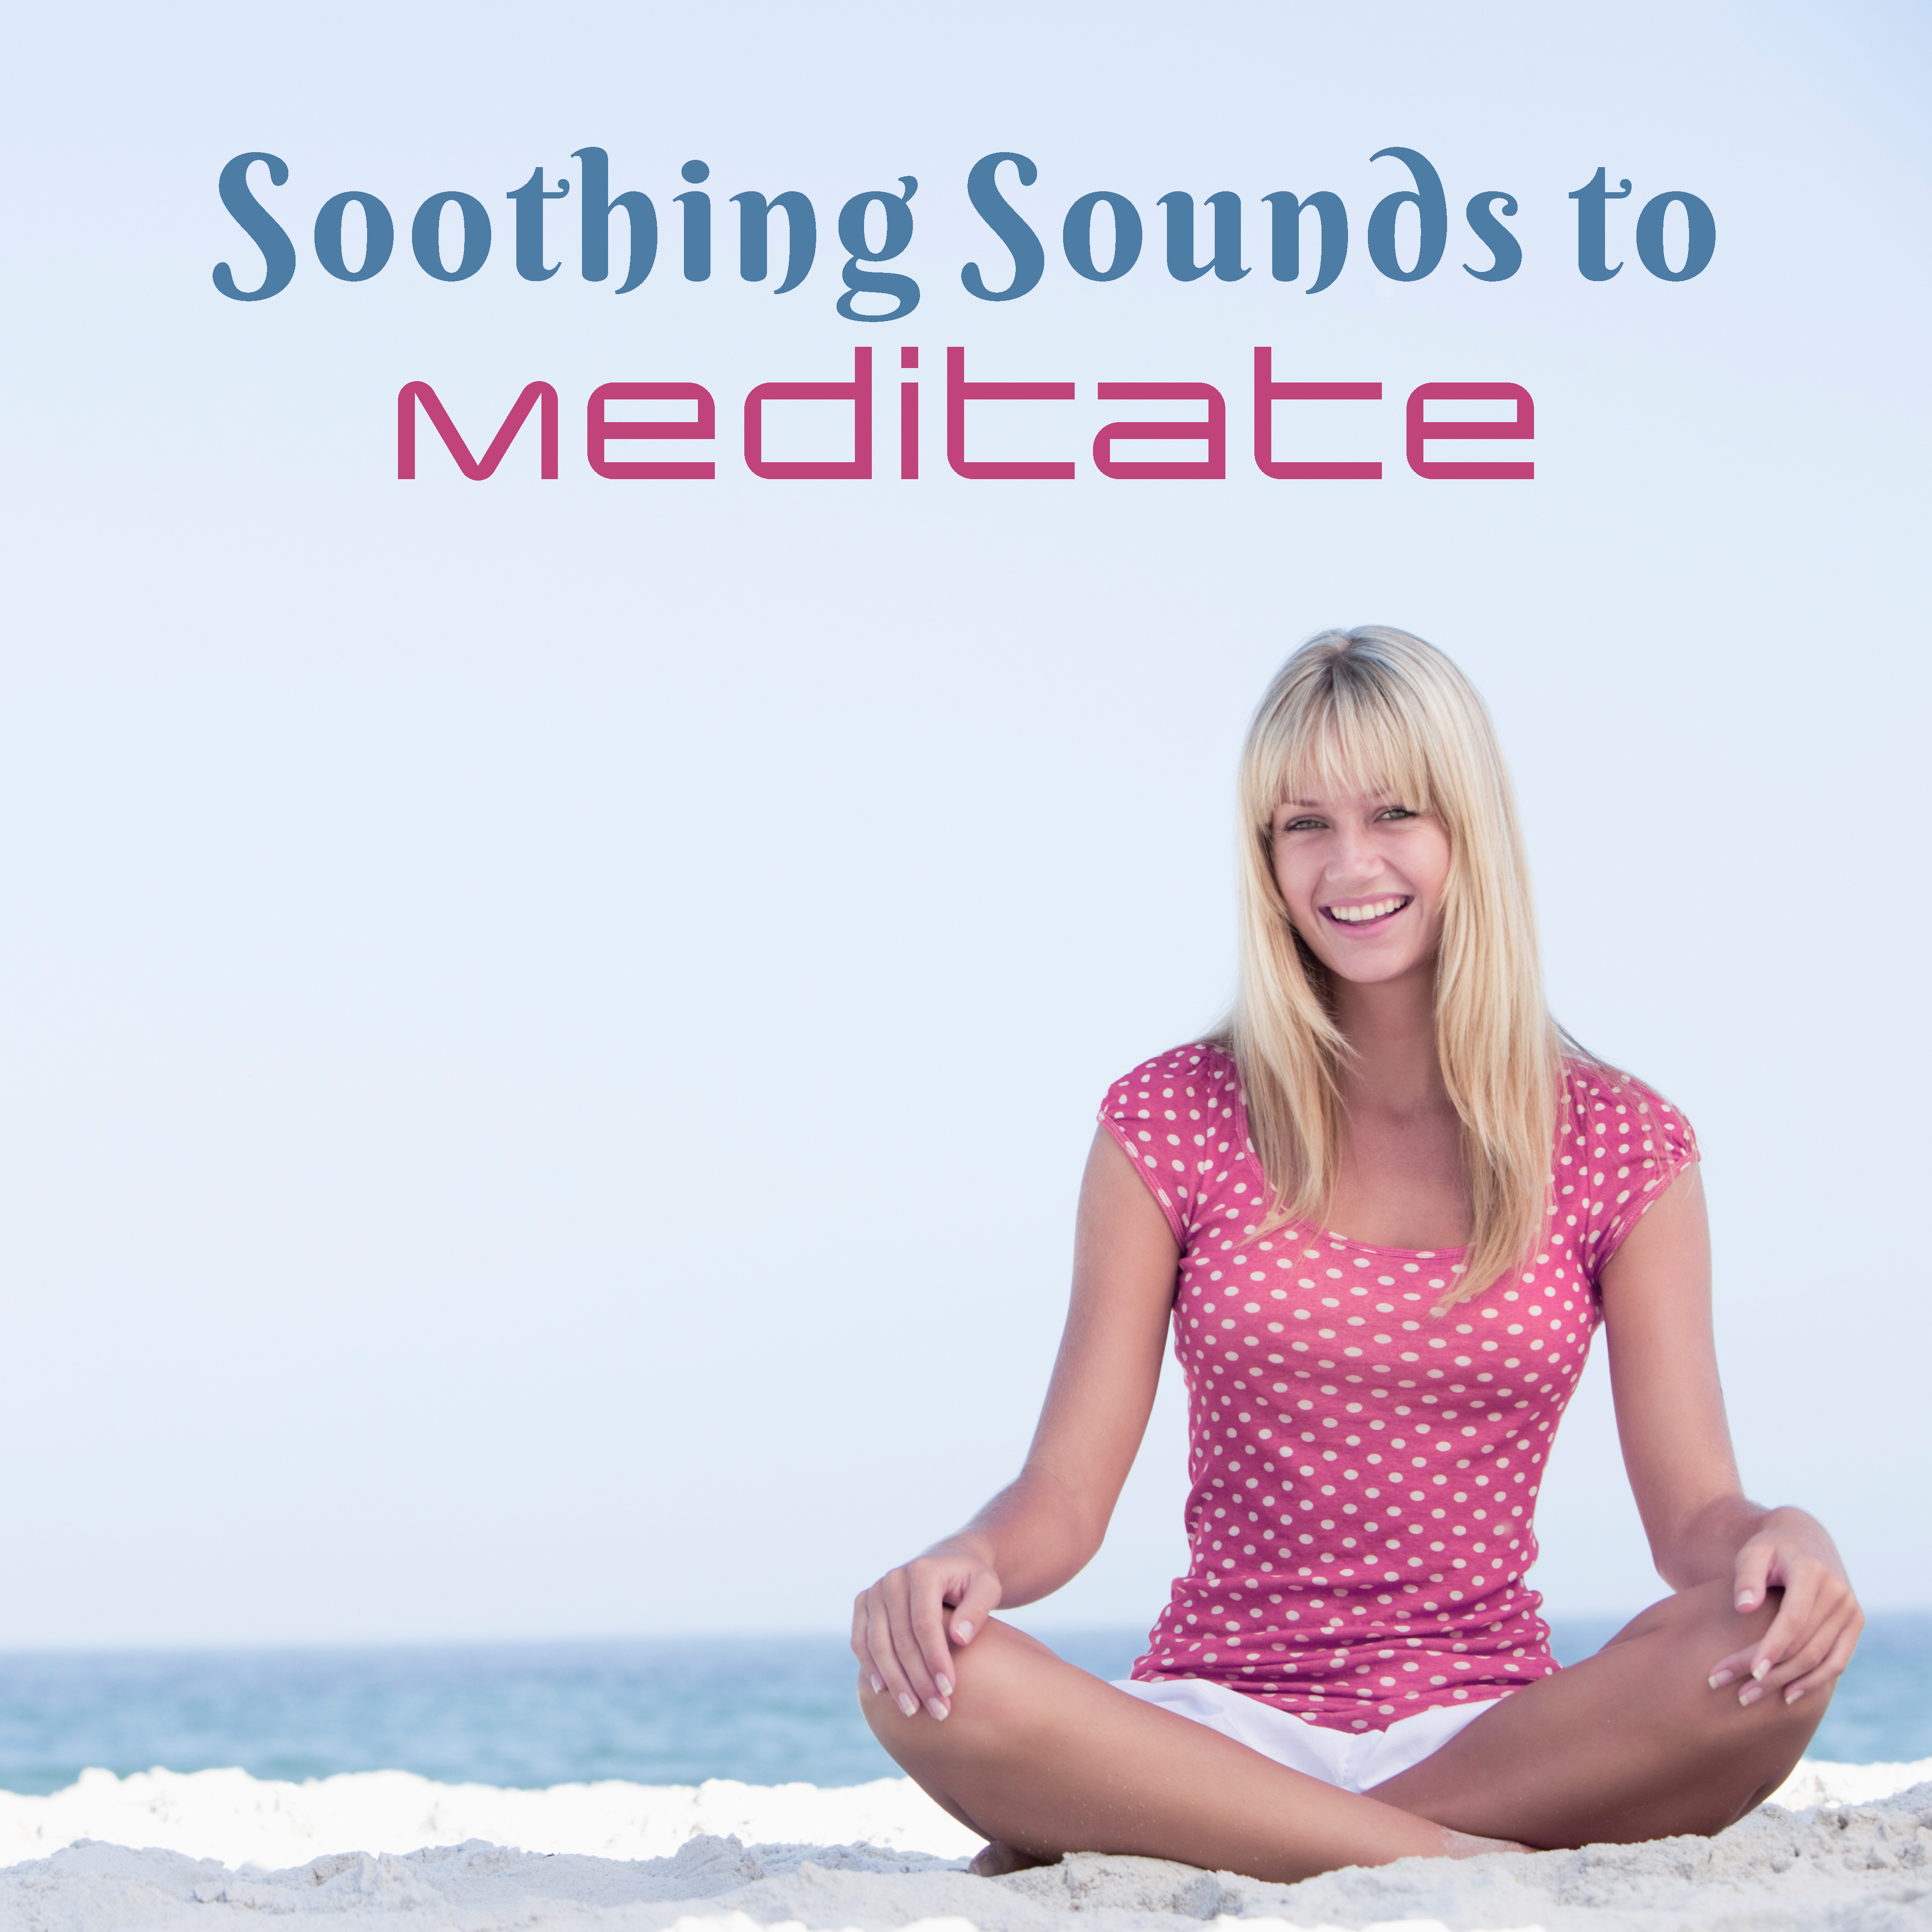 Soothing Sounds to Meditate – Easy Listening Meditation Music, Healing Therapy, Stress Relief, New Age Melodies